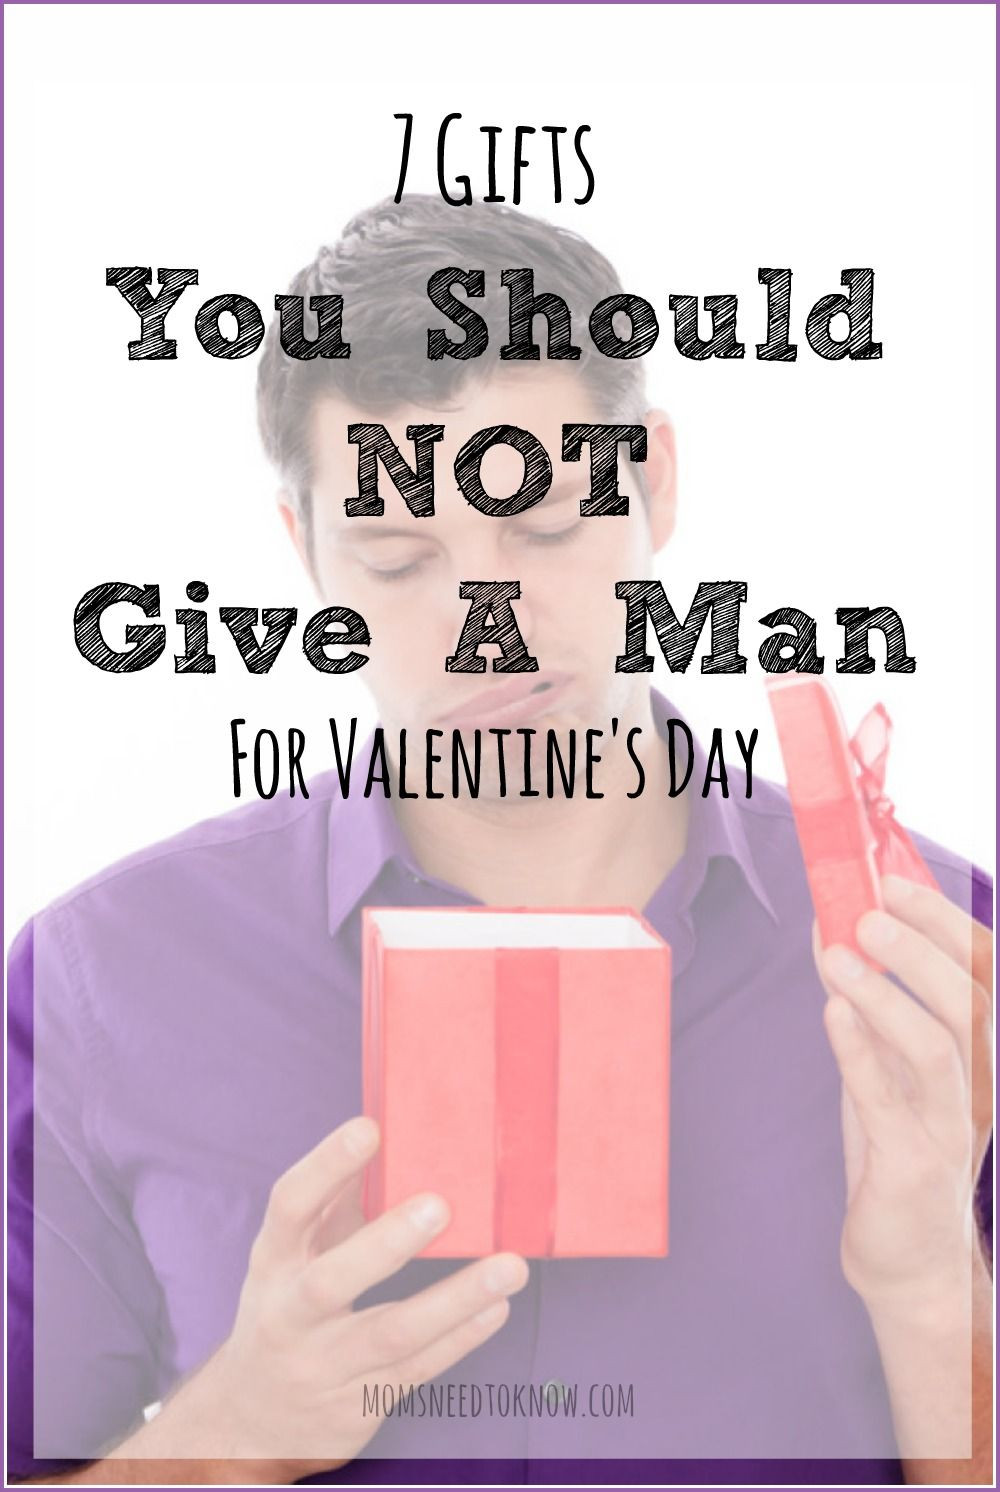 Gifts To Get Your Boyfriend For Valentines Day
 The 7 Gifts You Should Never Buy a Man For Valentines Day